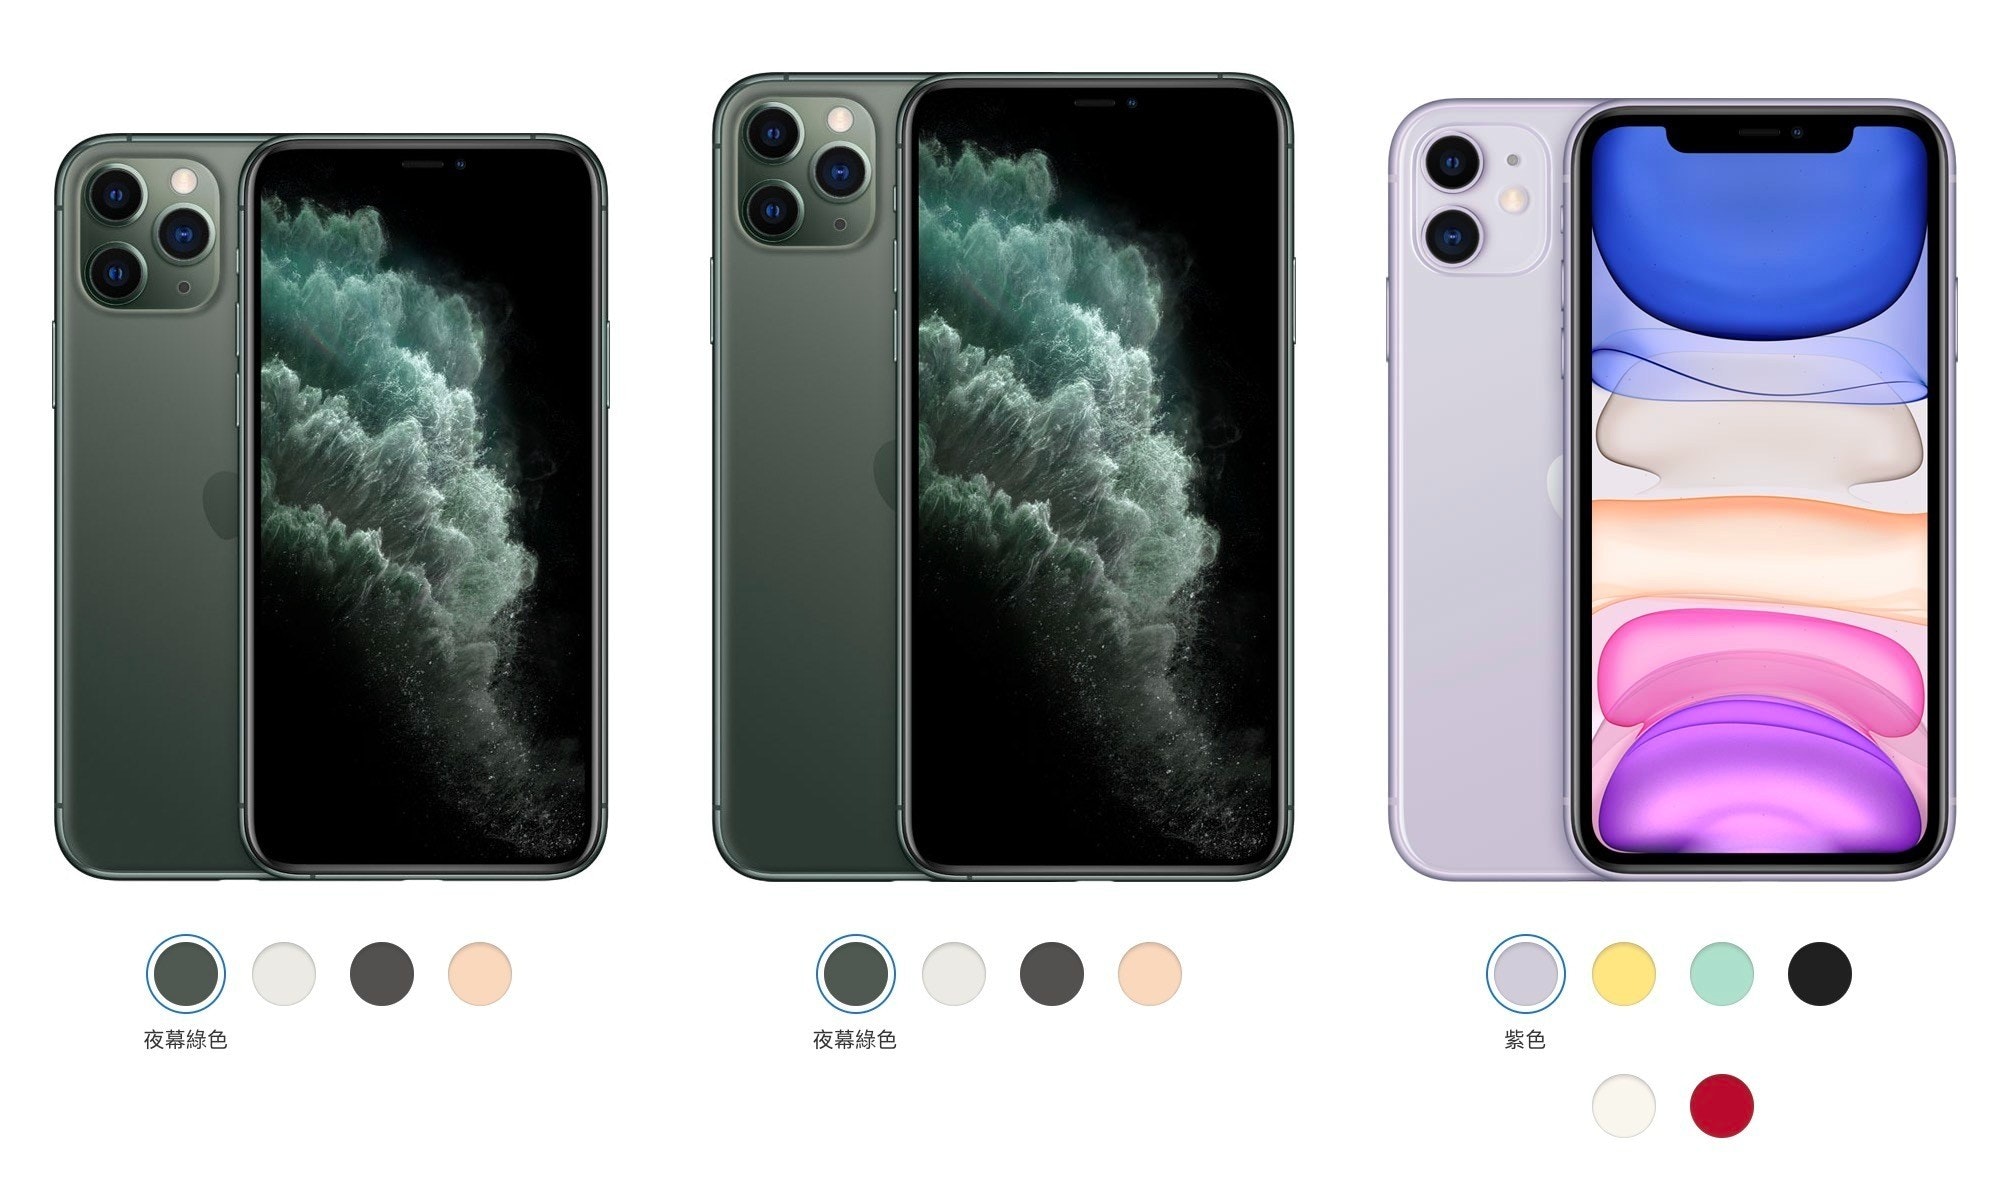 iPhone X, Apple, Smartphone, , iPhone XR, , Apple iPhone XS Max, , Apple Watch Series 3, , mobile phone case, Mobile phone, Gadget, Electronic device, Communication Device, Technology, Portable communications device, Smartphone, Iphone, Teal, Mobile phone case